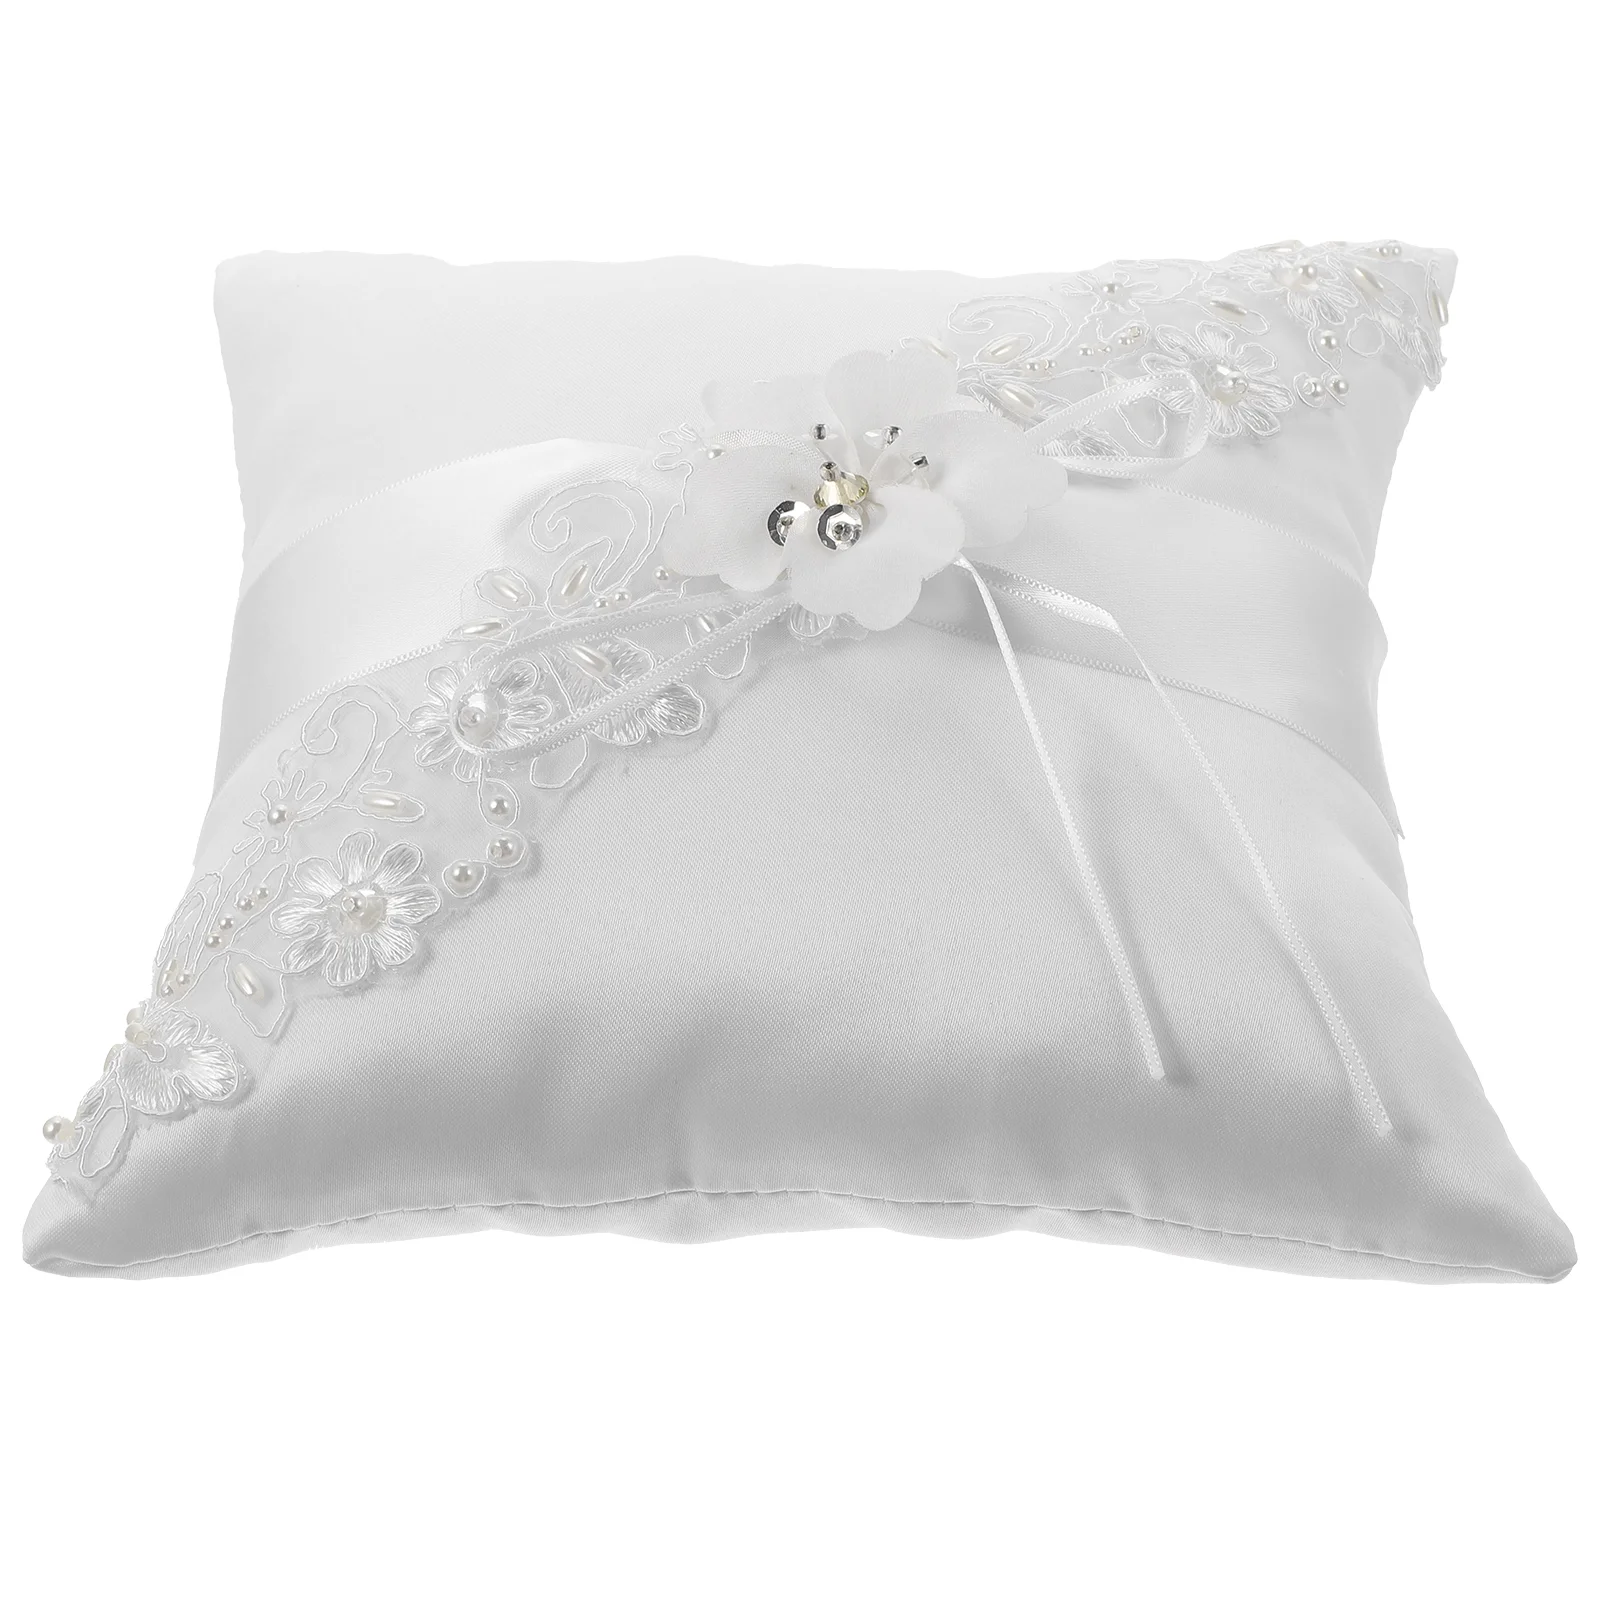 

Ring Wedding Pillow Bearer Holder Pillows Engagement Cushion Supplies Party Proposal Gift Bridal Band Lace Box Accessories